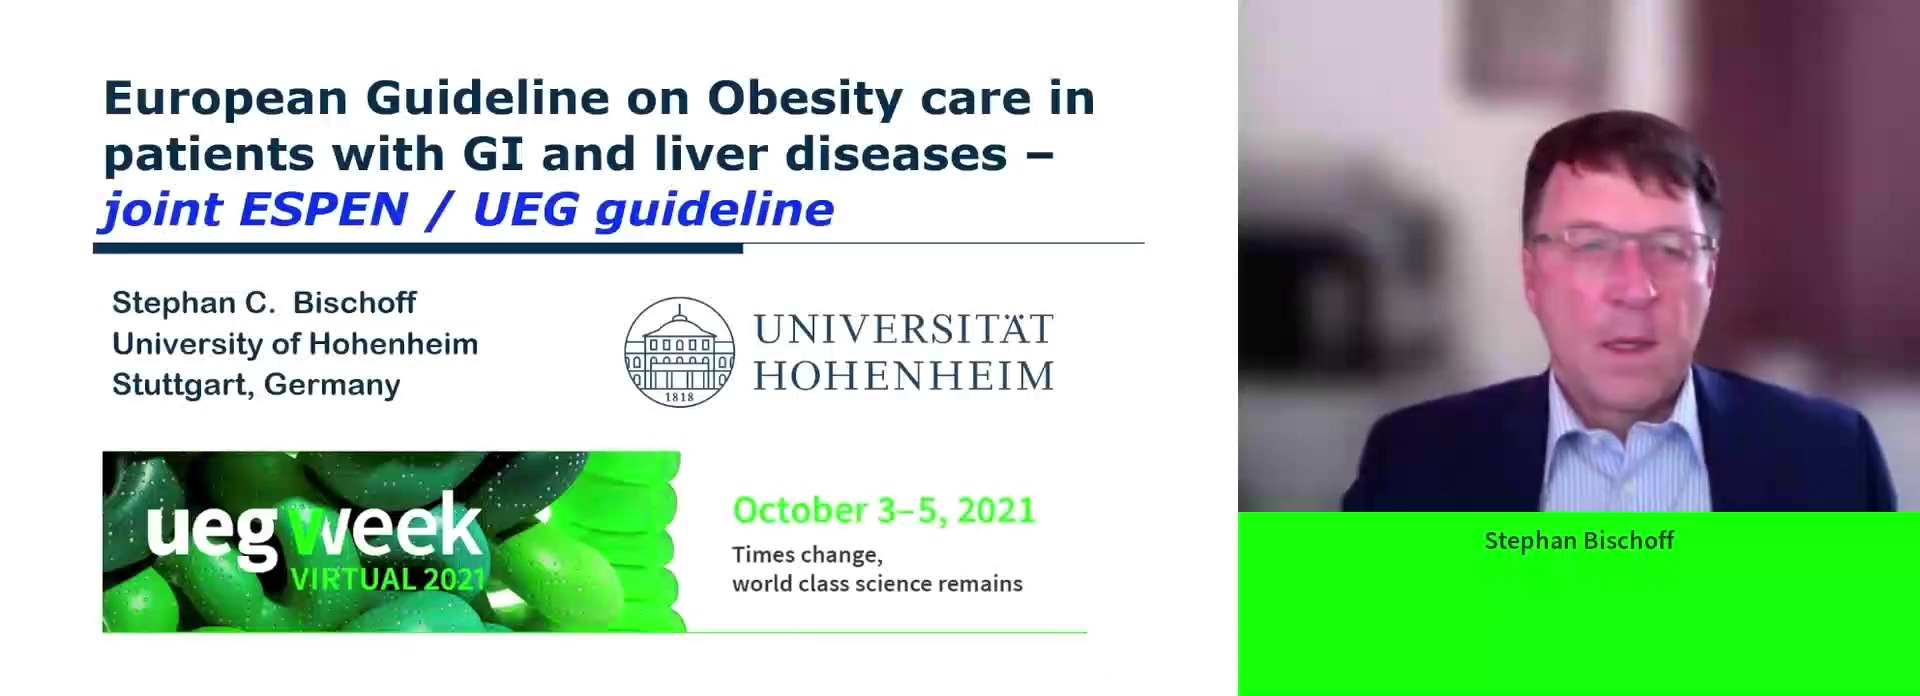 The European guideline on obesity care in patients with GI and liver disease